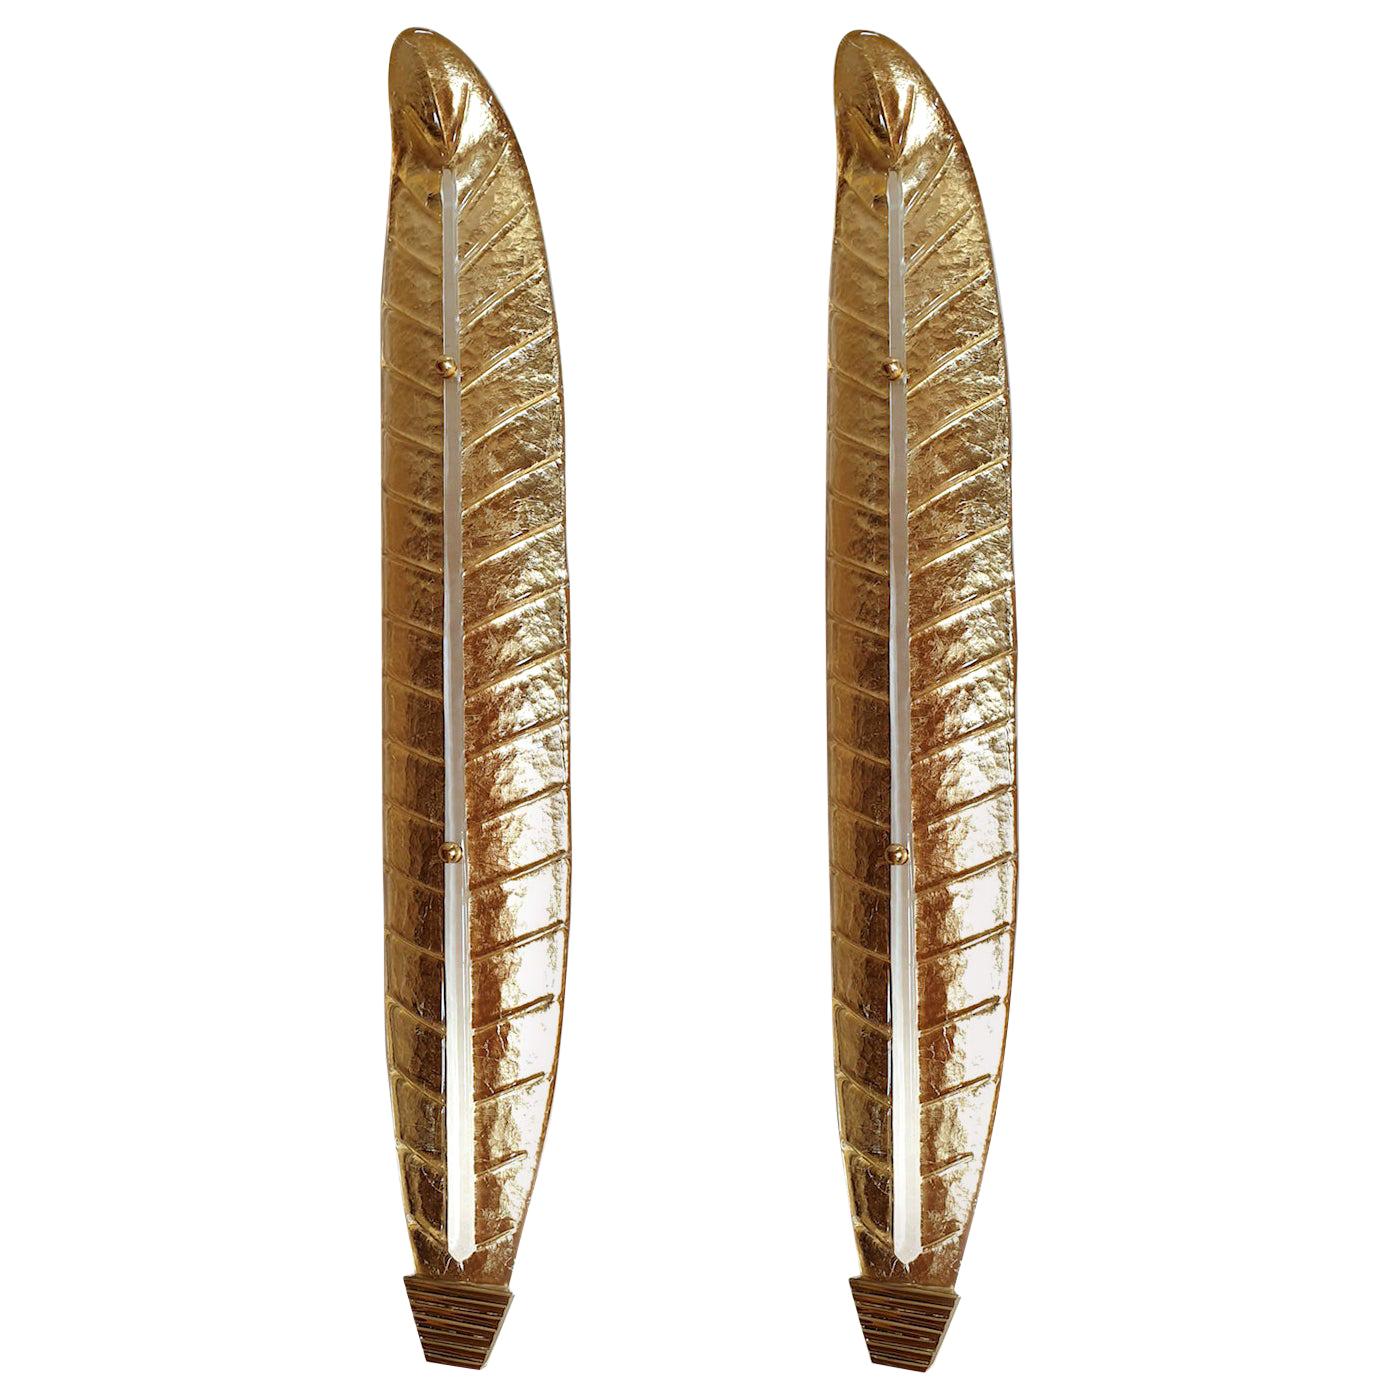 Two Large Mid-Century Modern Murano Glass Gold Leaf Sconces, Barovier Style 1970